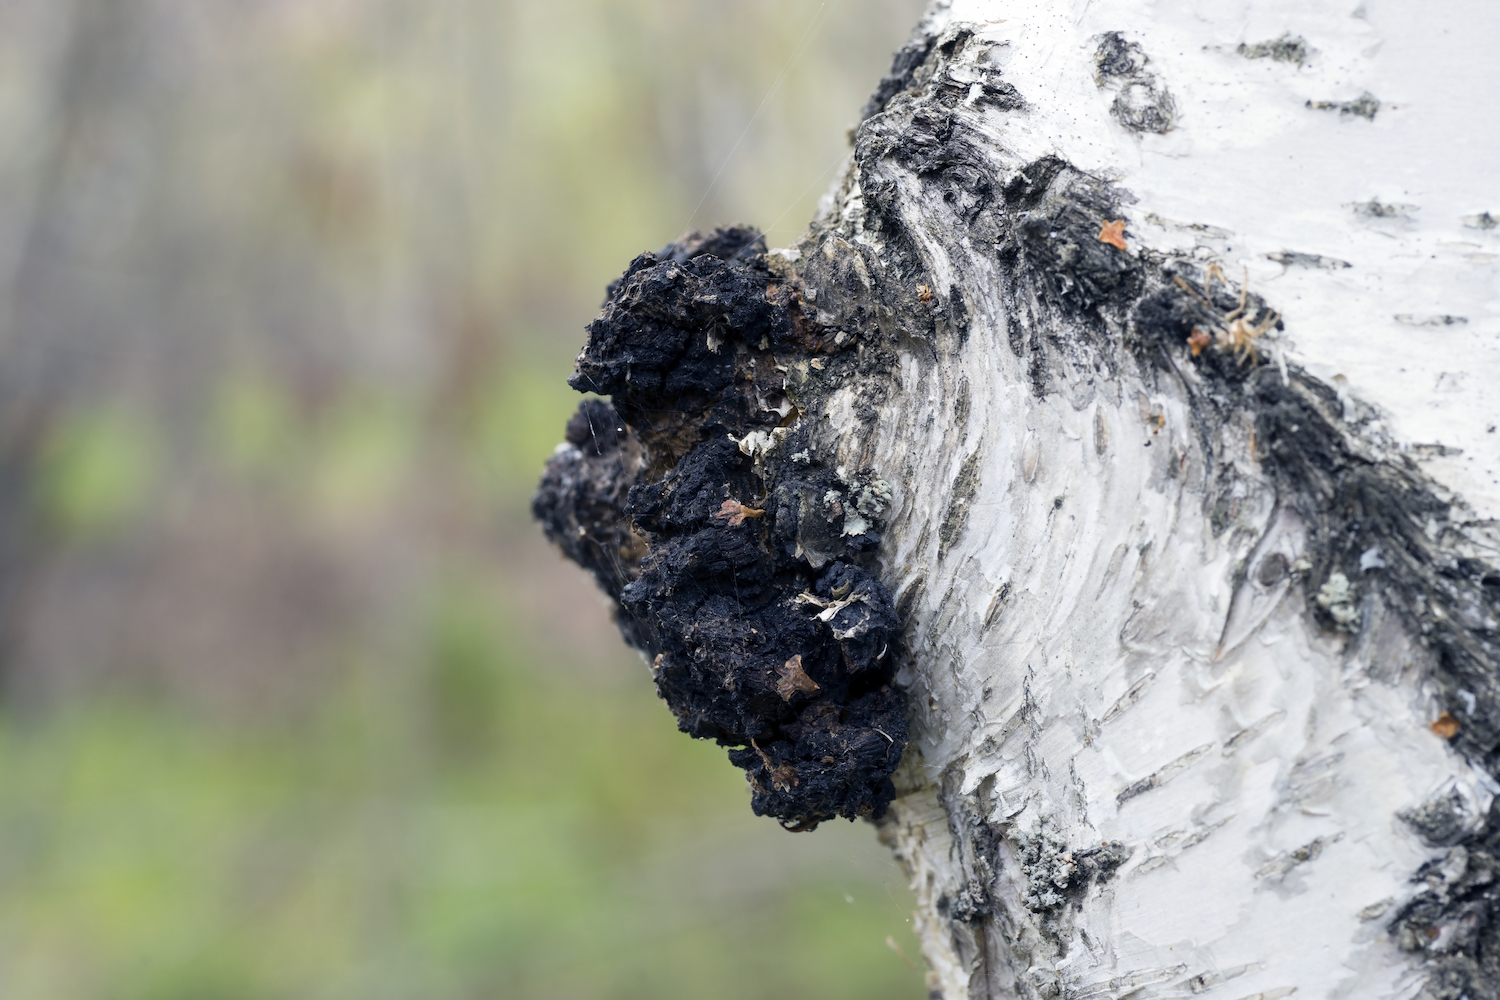  Chaga as you would find it on a birch tree. 